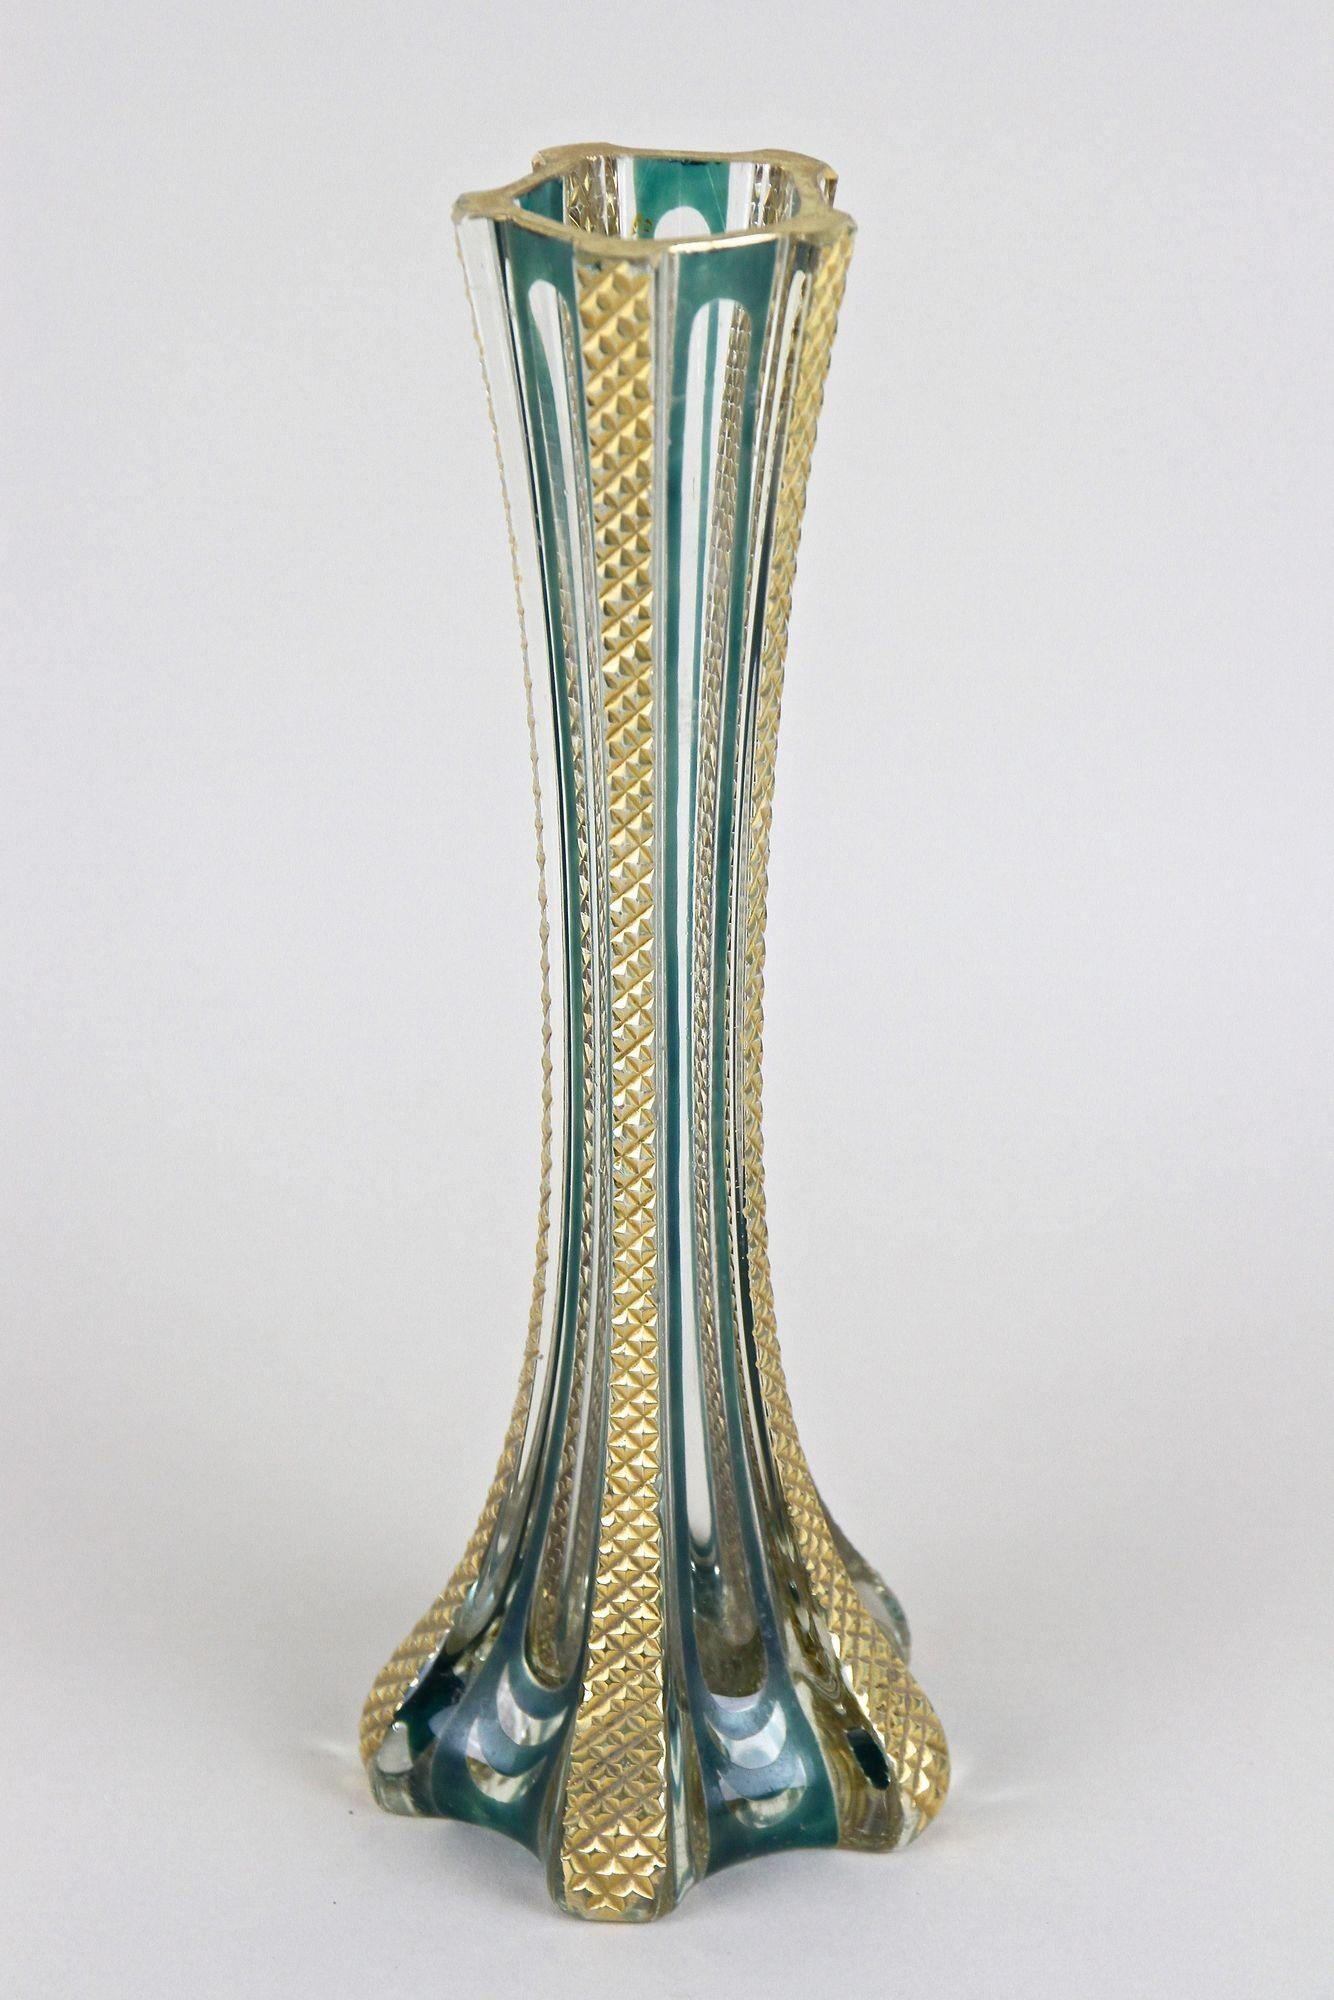 Murano Glass Vase With Gold Accents, Early 20th Century - Italy ca. 1930 For Sale 1